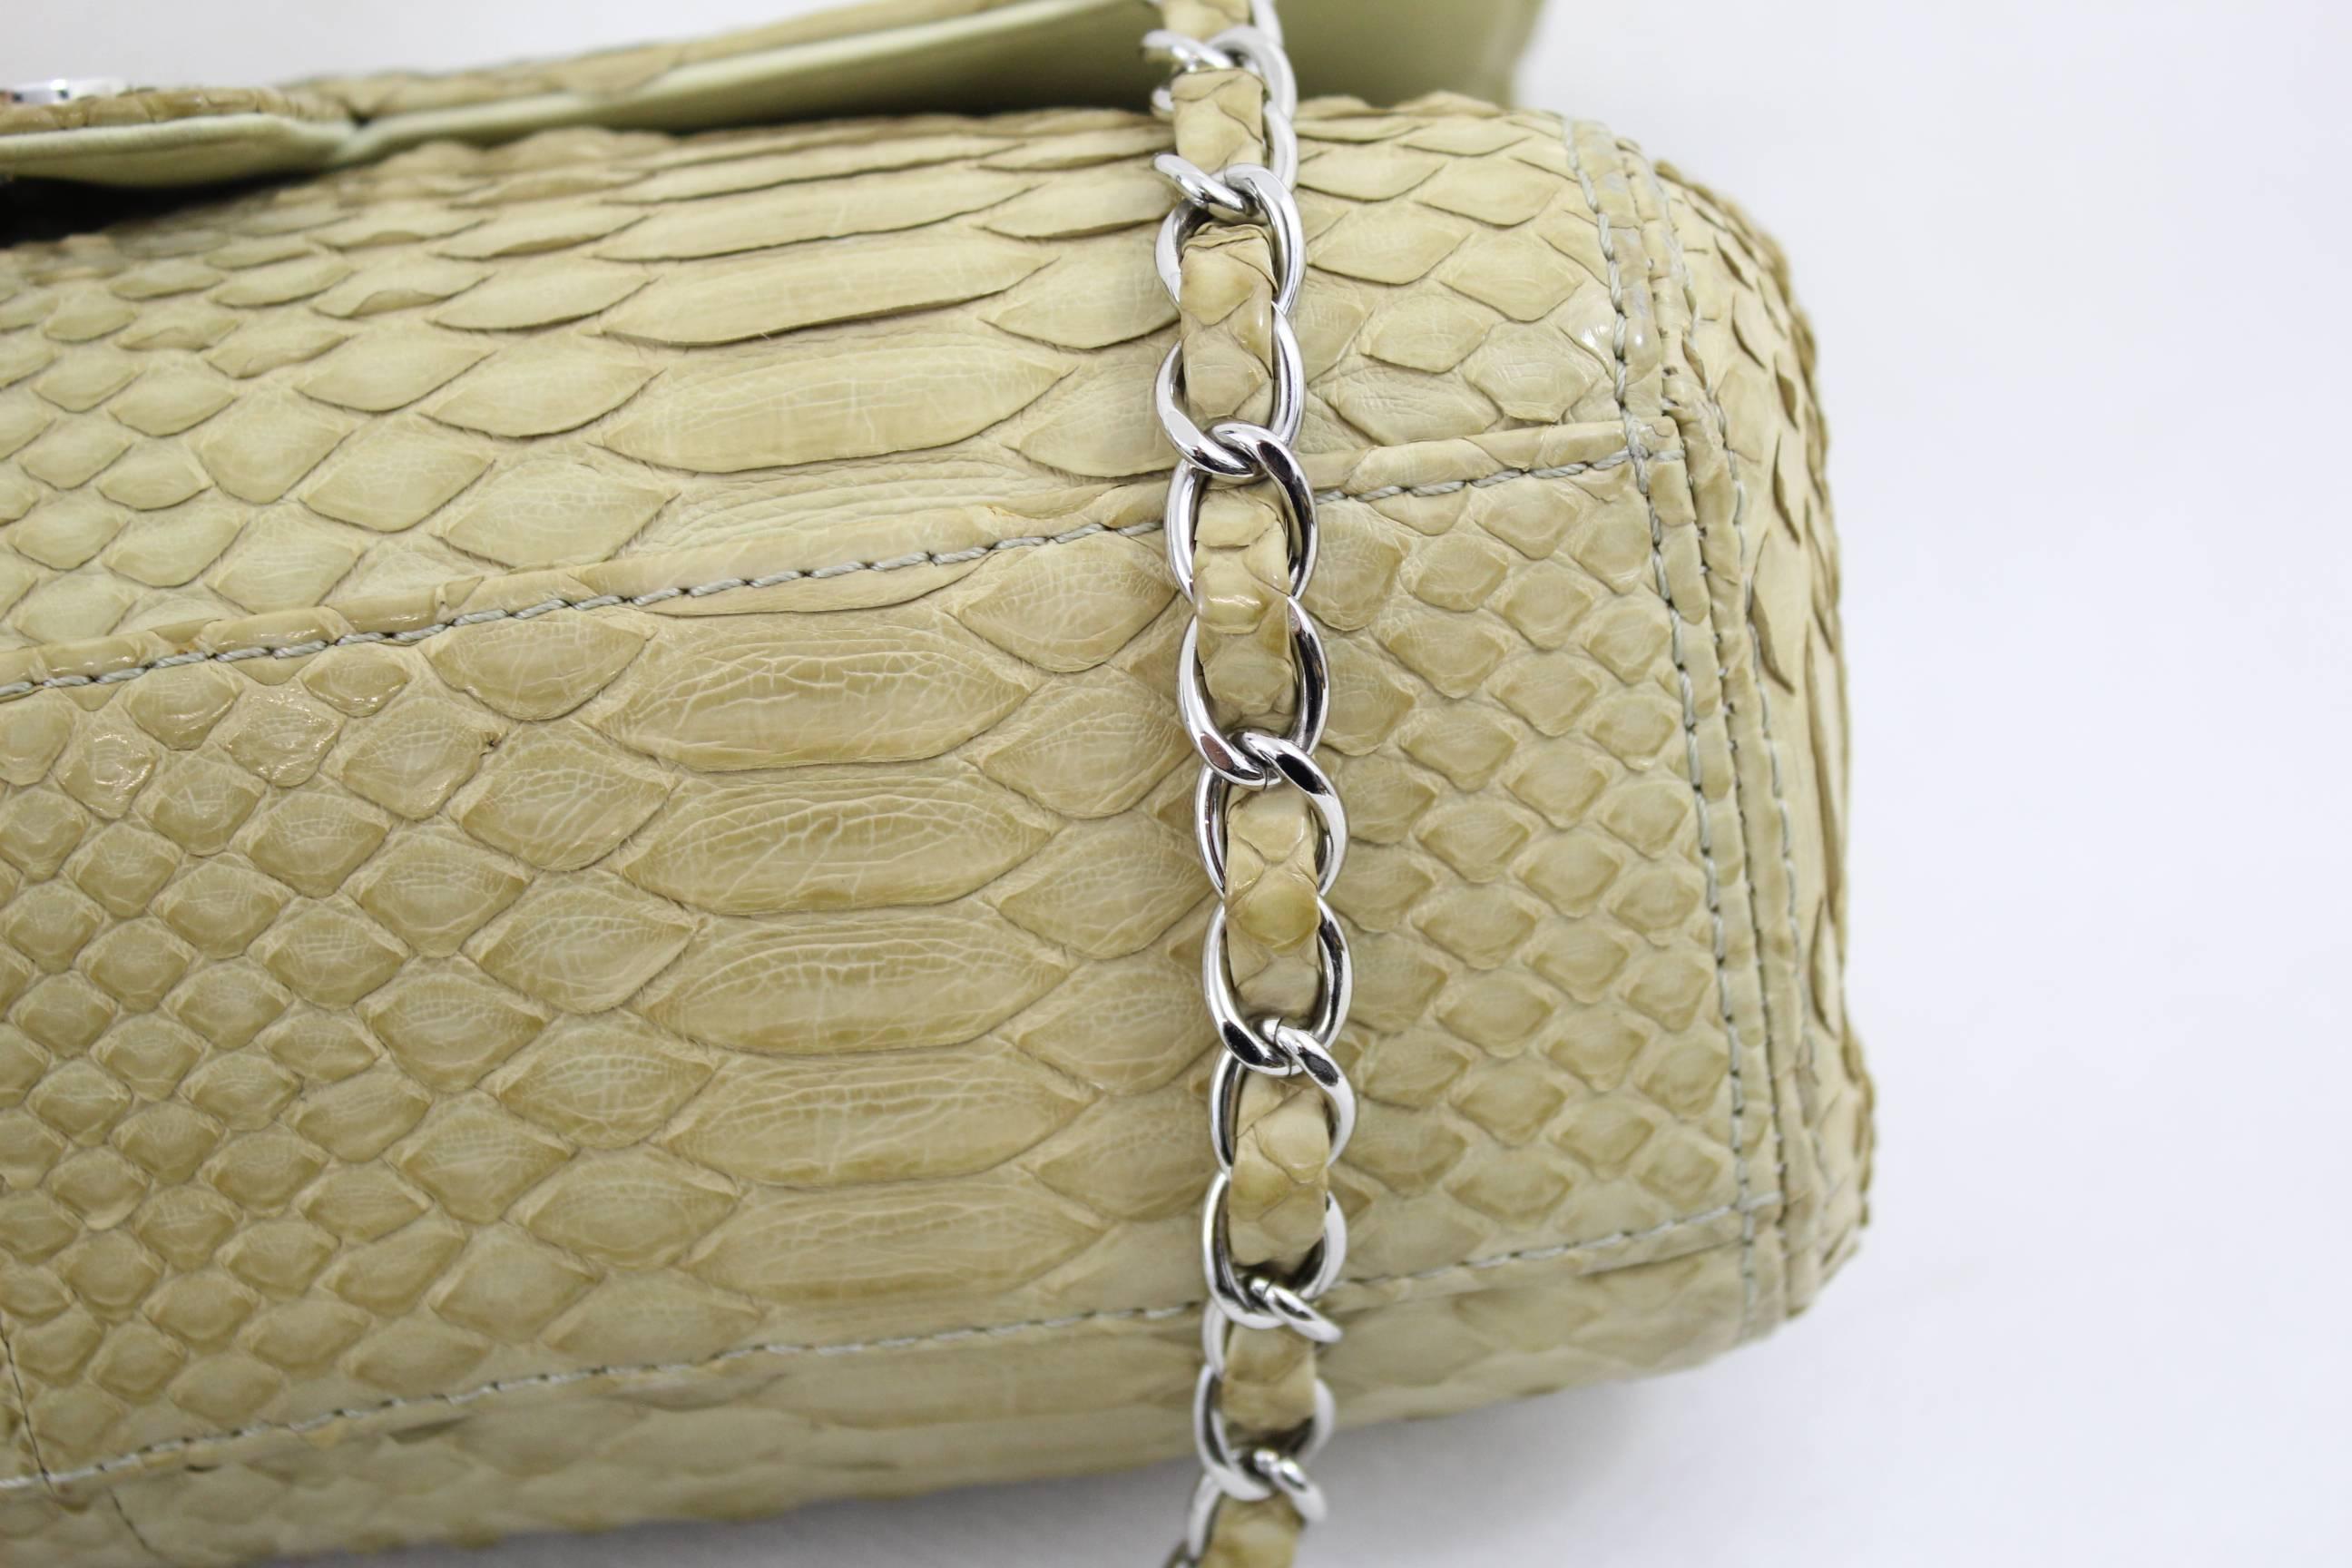 Brown Chanel Timeless Bag in Exotic skin and stainless steel  hardware